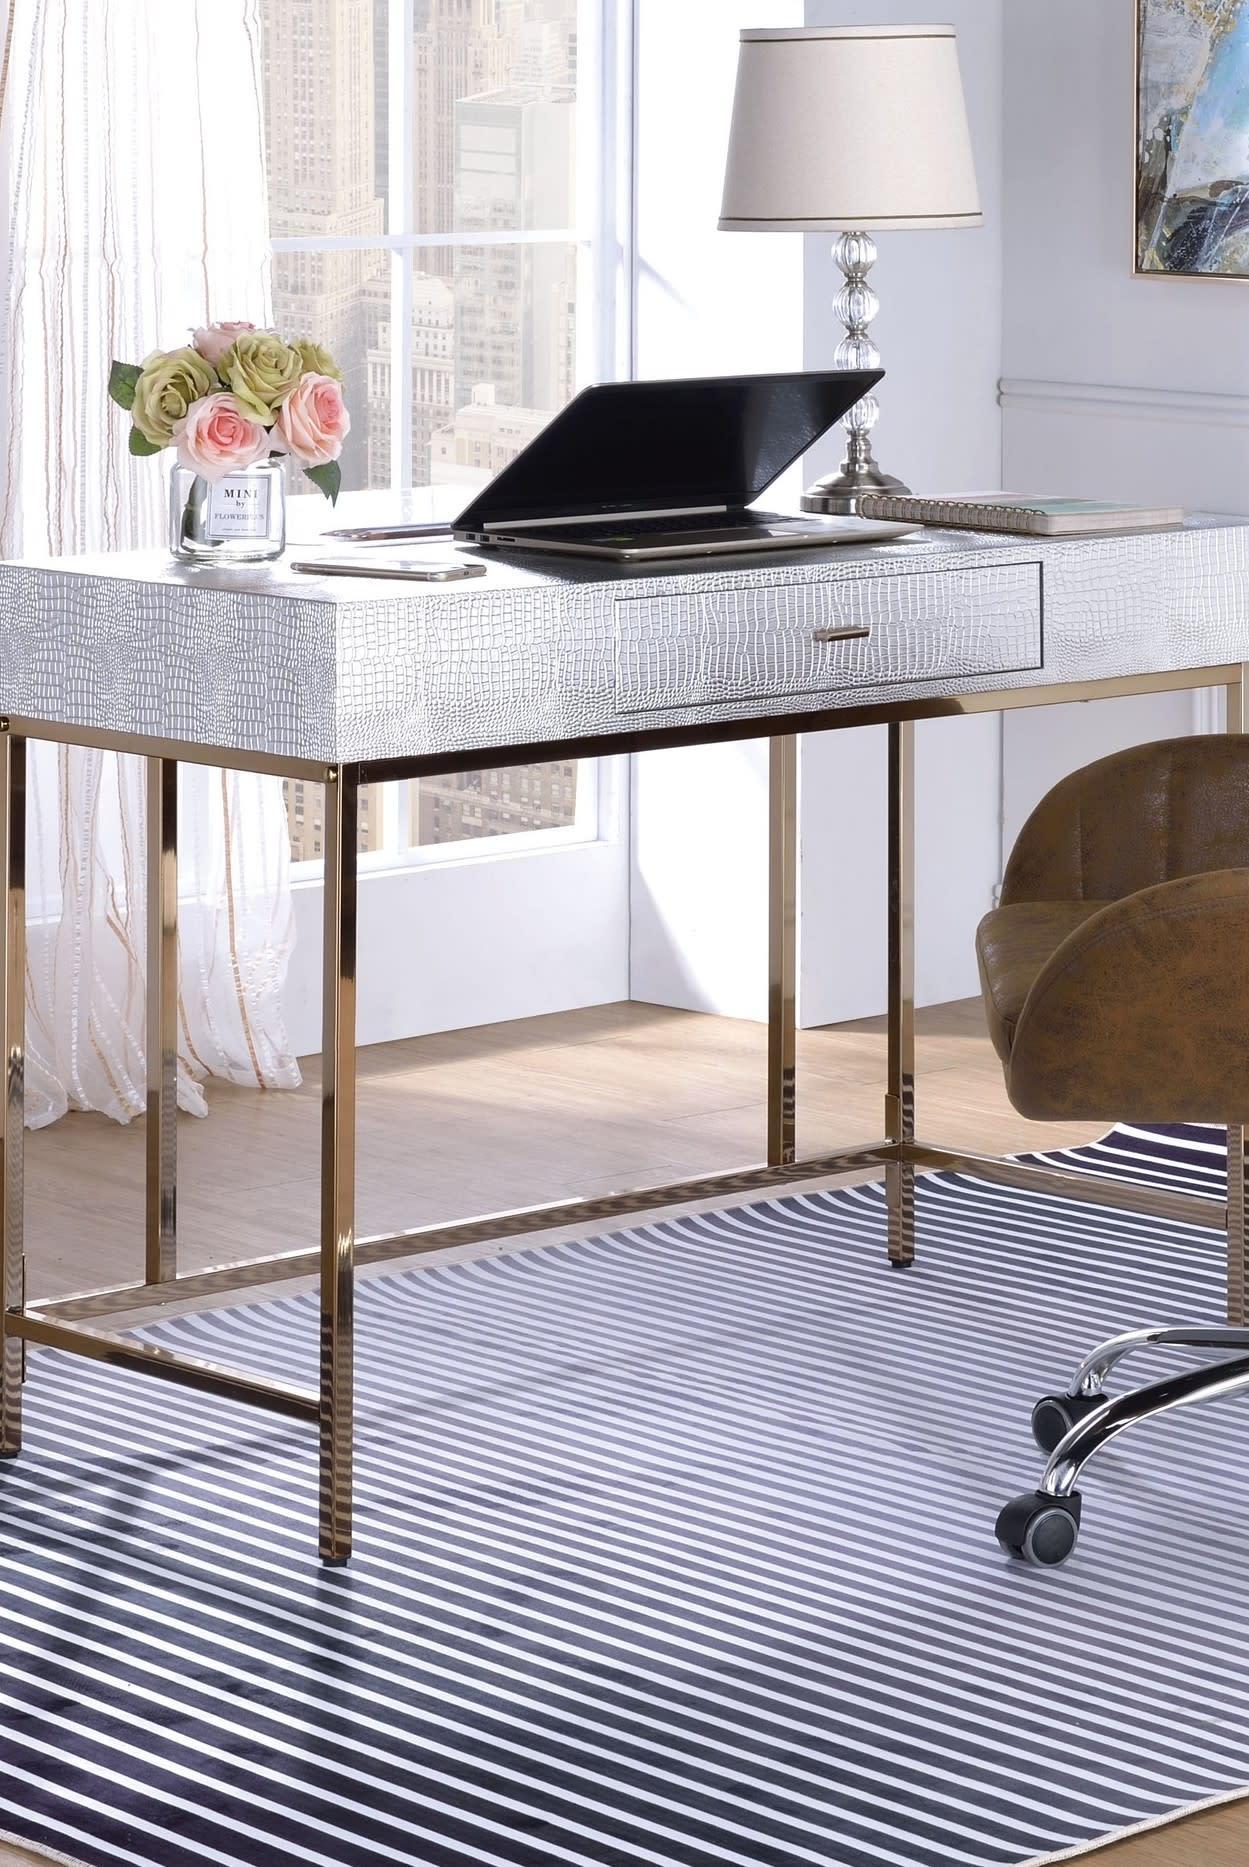 ACME Piety Vanity Desk in Silver PU & Champagne